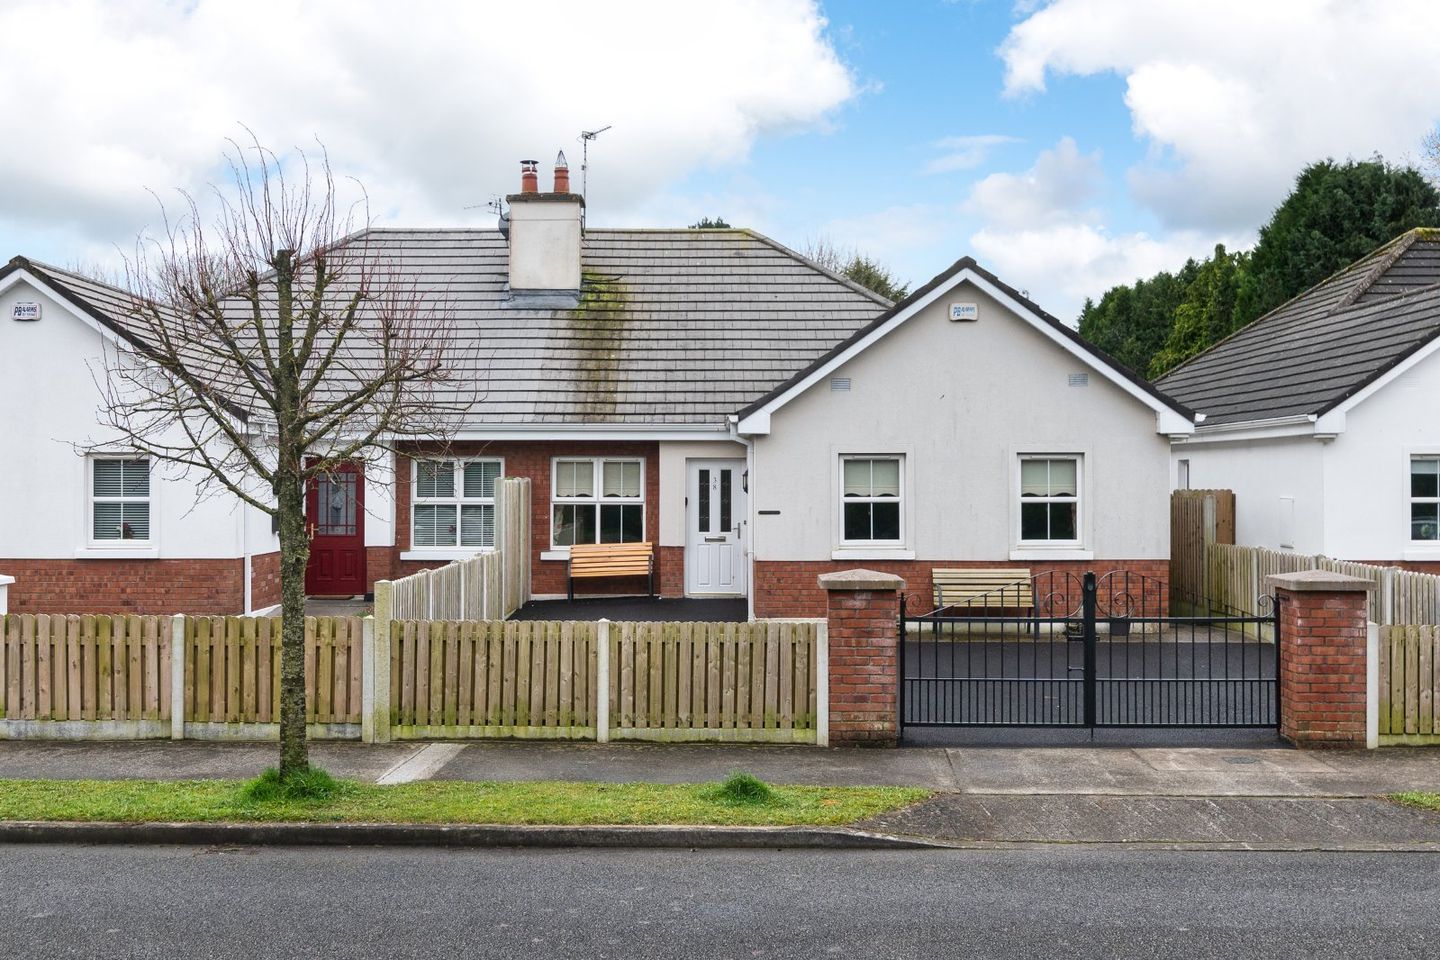 38 Grand Canal Court, Tullamore, Co. Offaly, R35E5D1